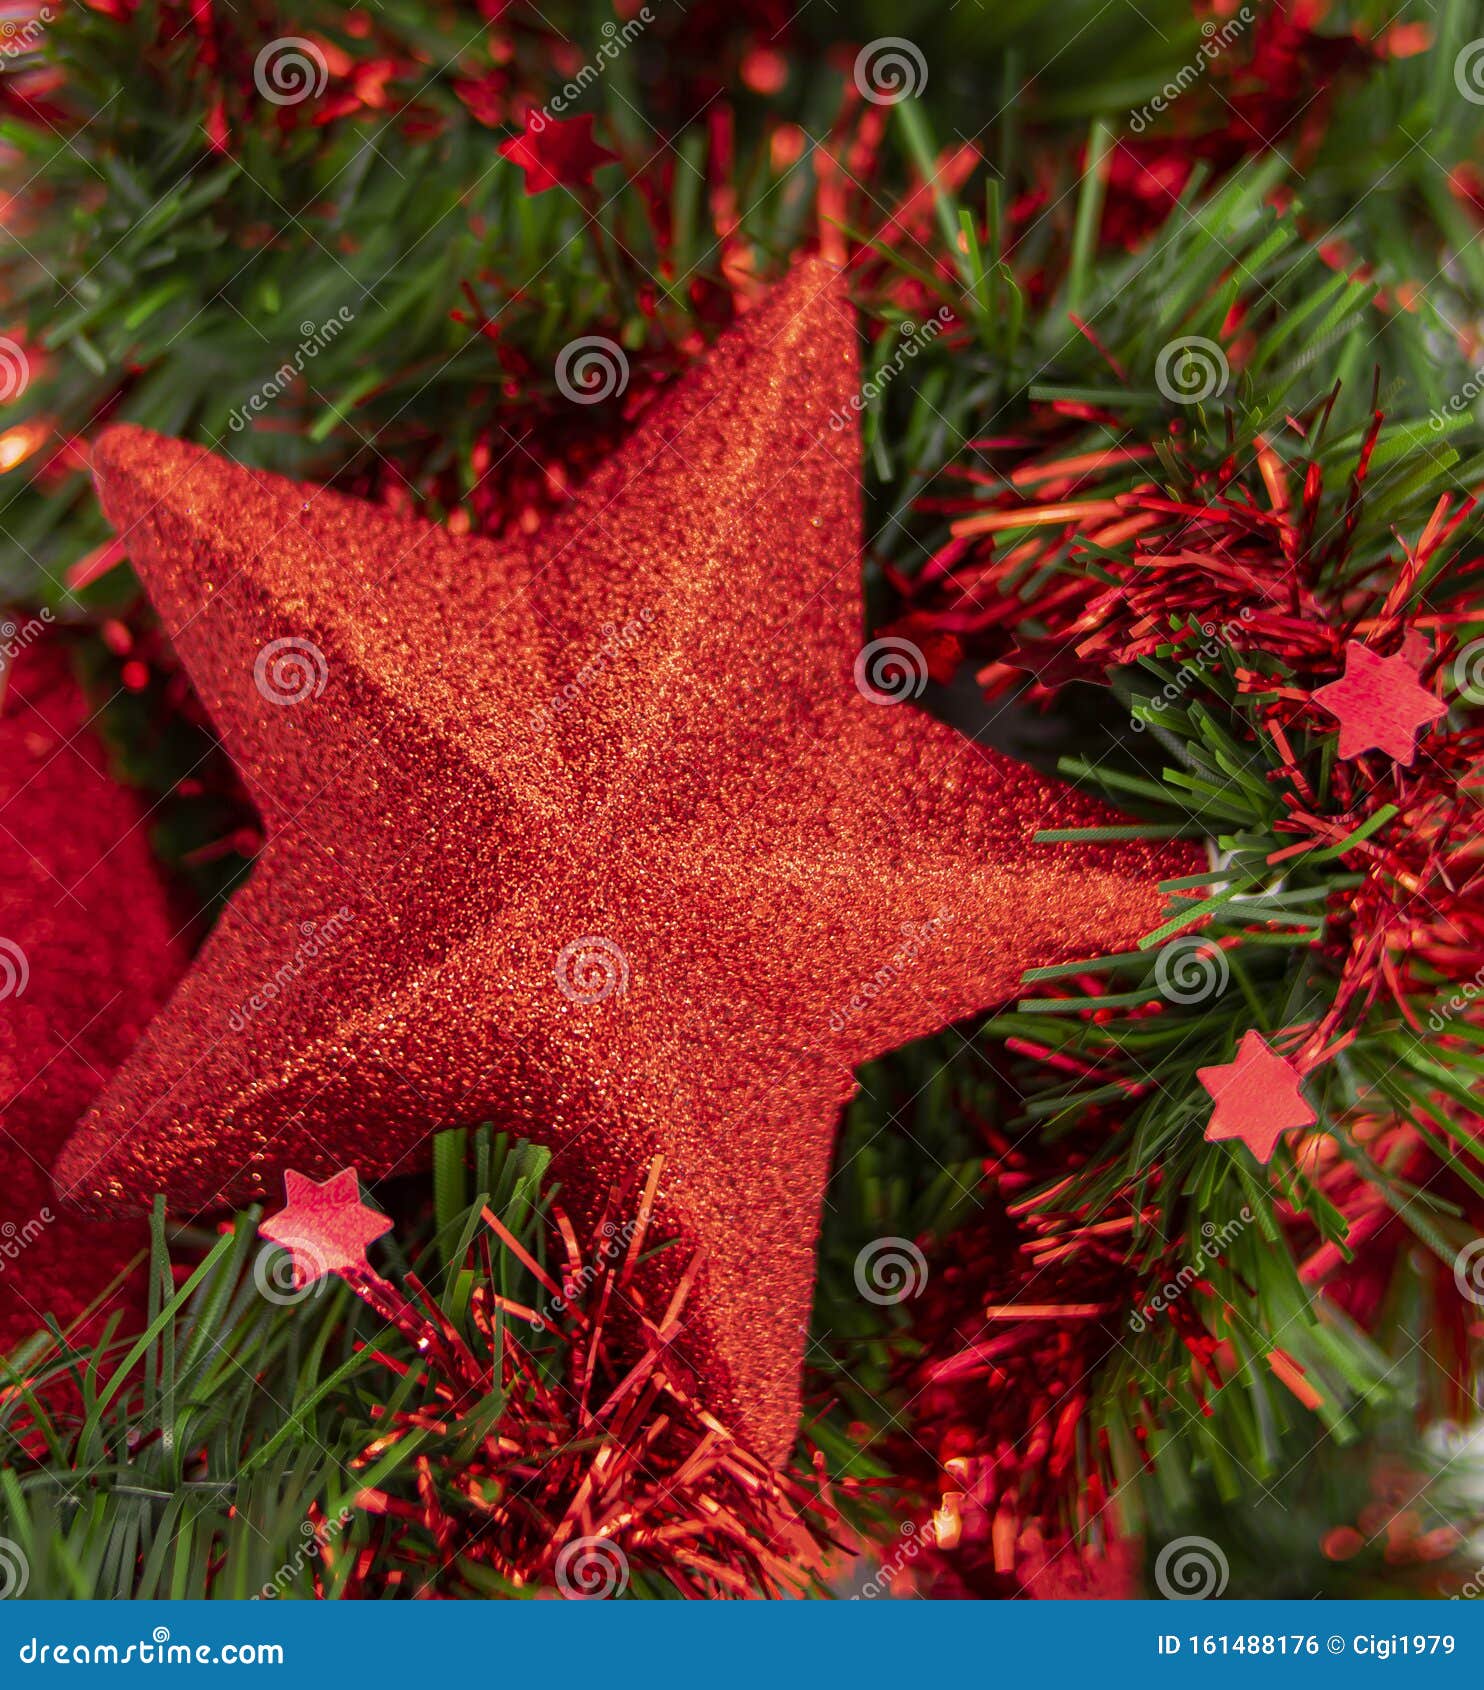 shiny decorative christmas star on green and red tinsel leaves